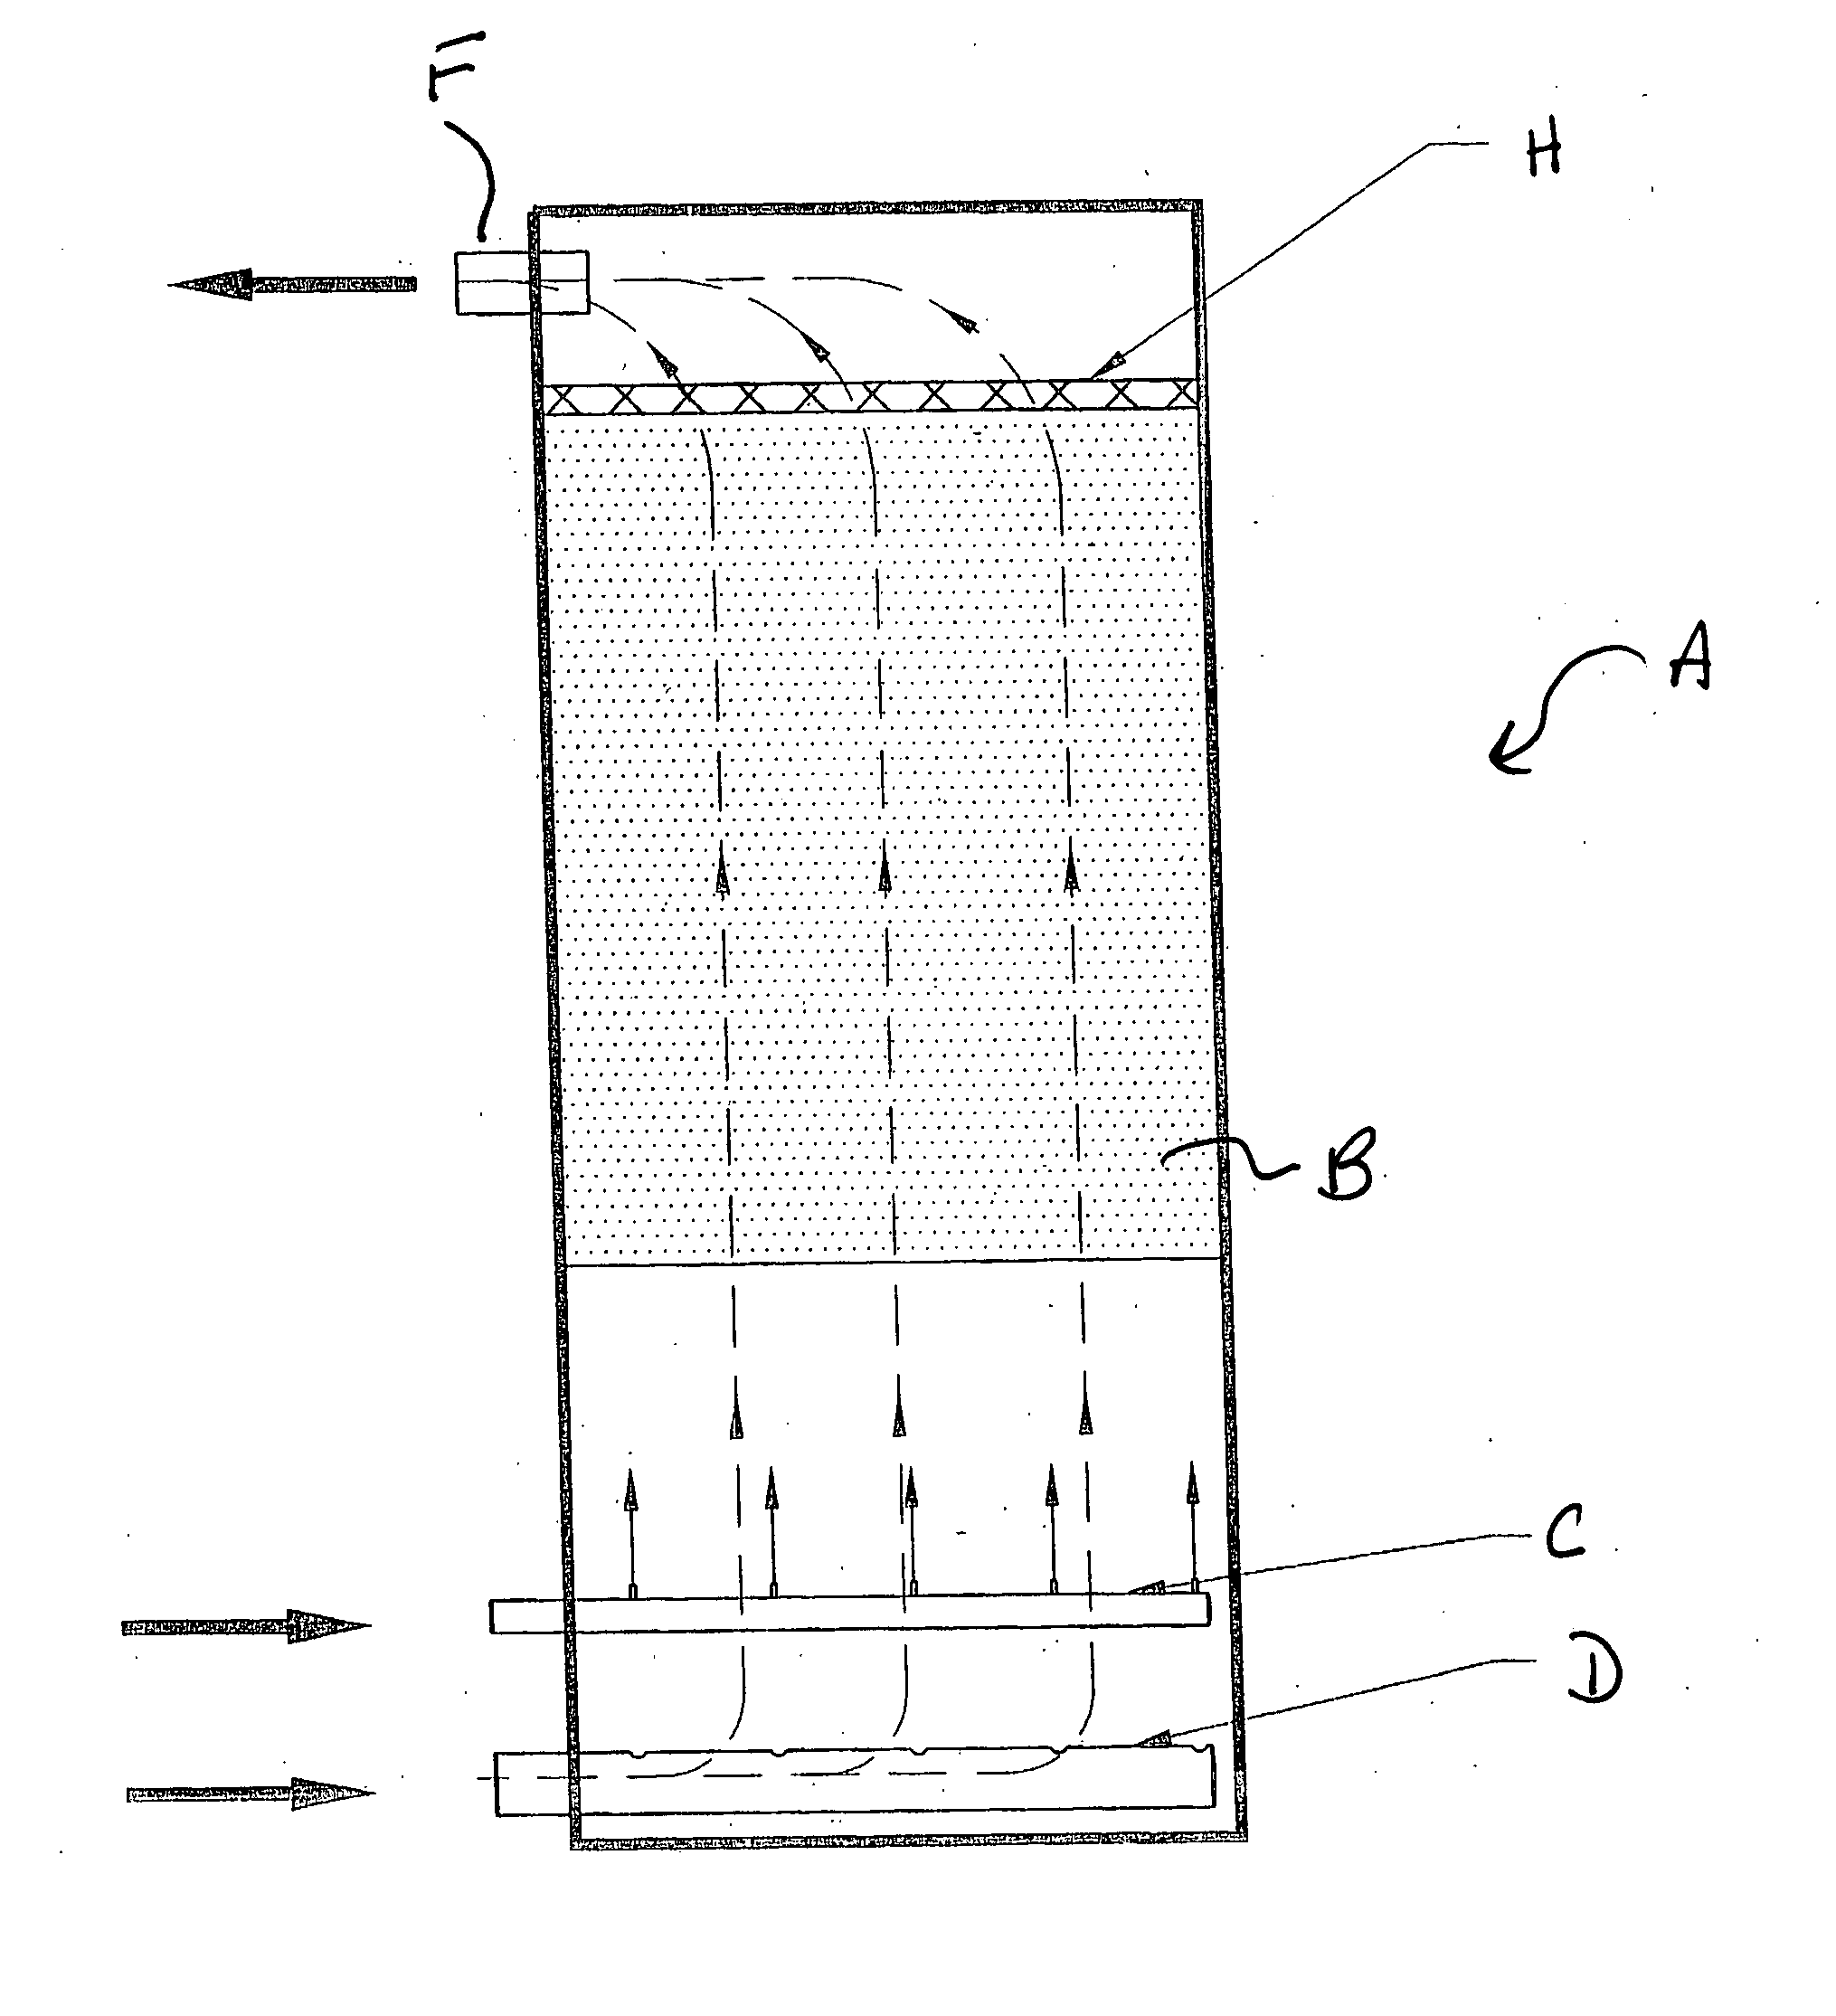 Filter system for filtering water or wastewater and a method of operating the filter system